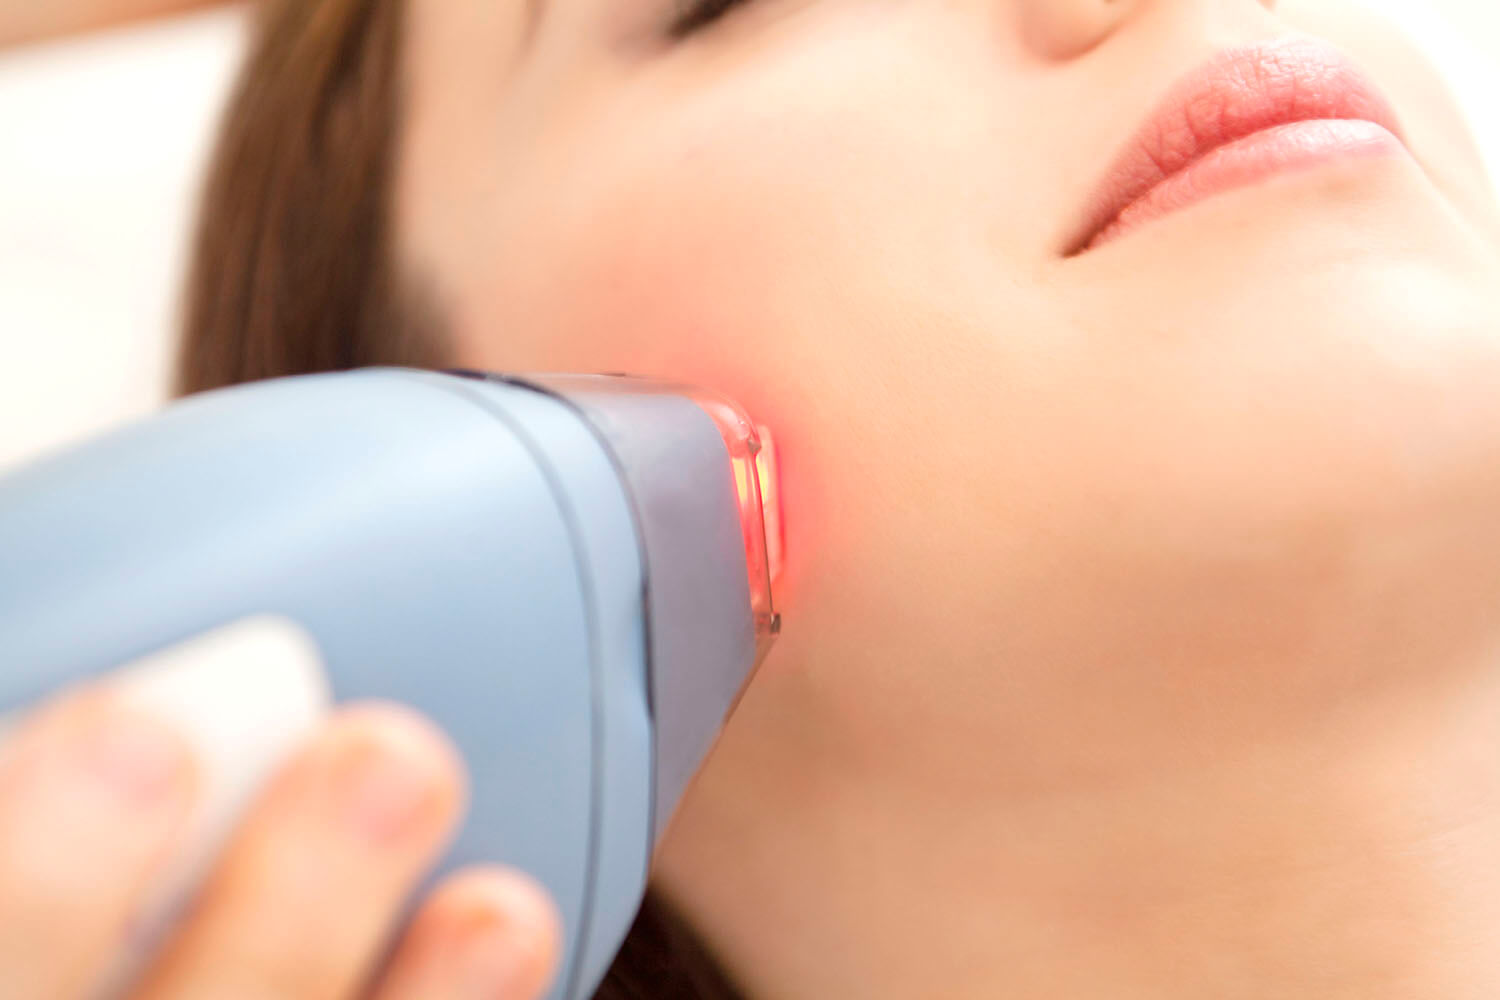 Benefits of laser hair removal - it's quicker